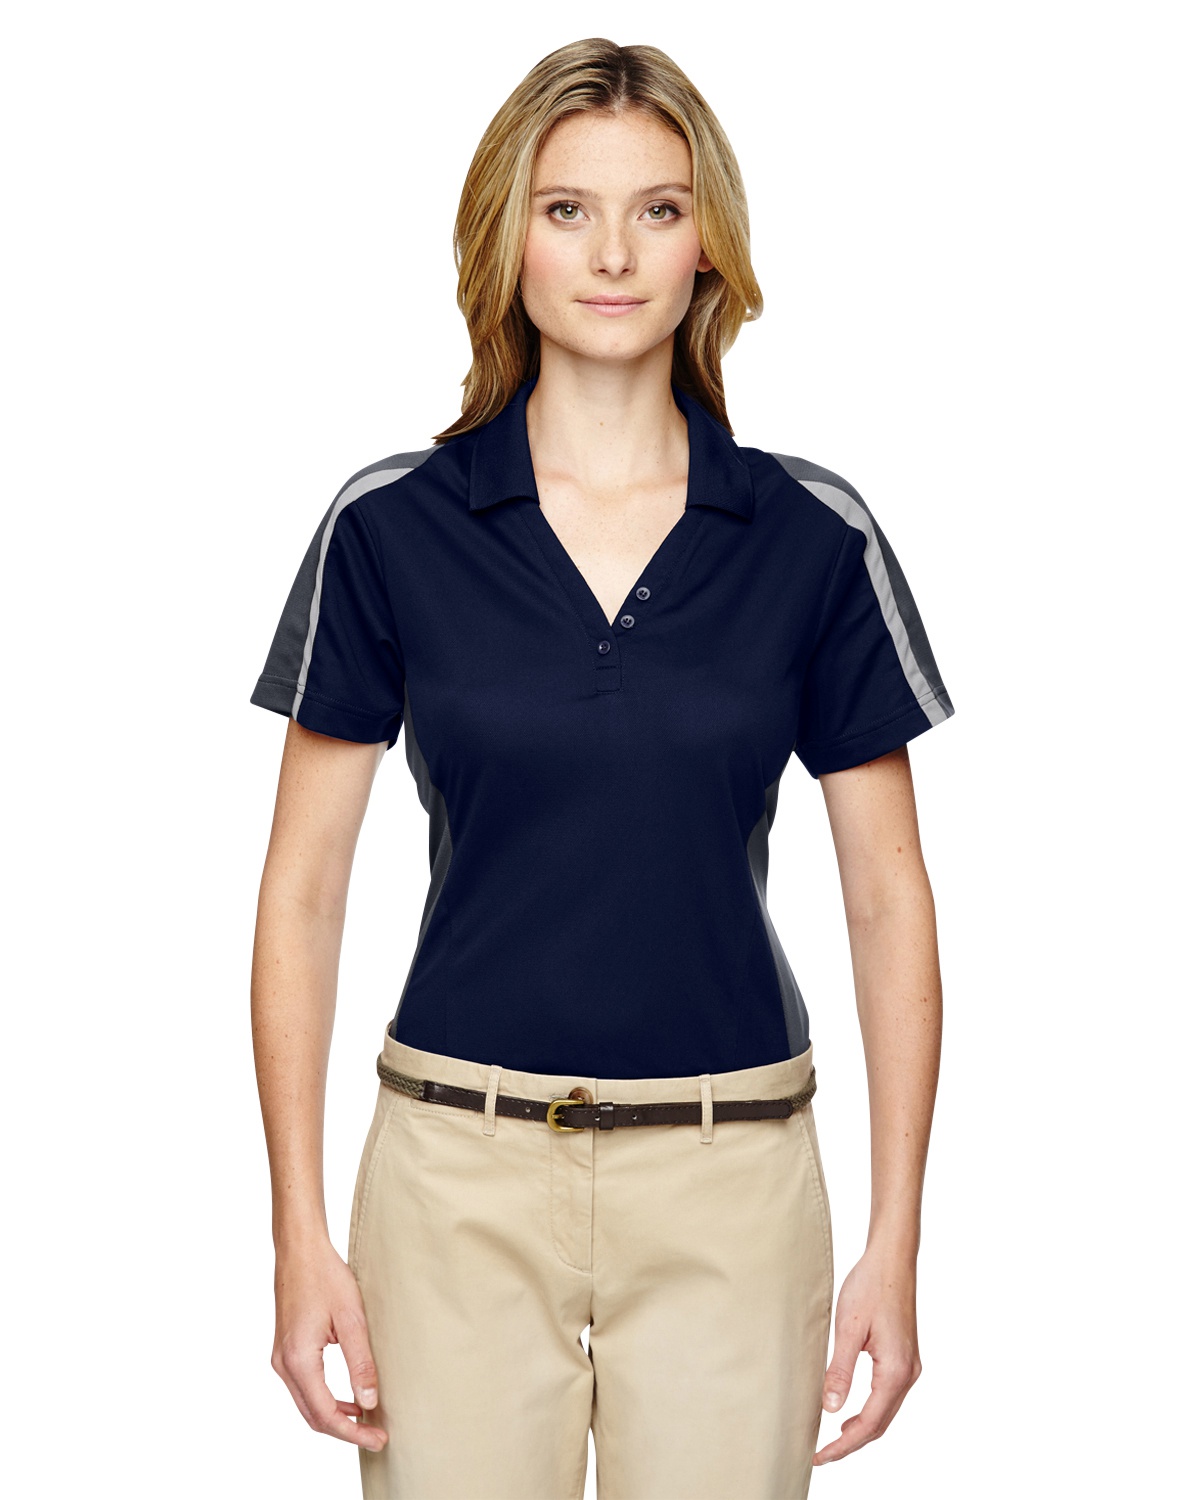 'Ash City - Extreme 75119 Ladies Eperformance Strike Colorblock Snag Protection Polo'